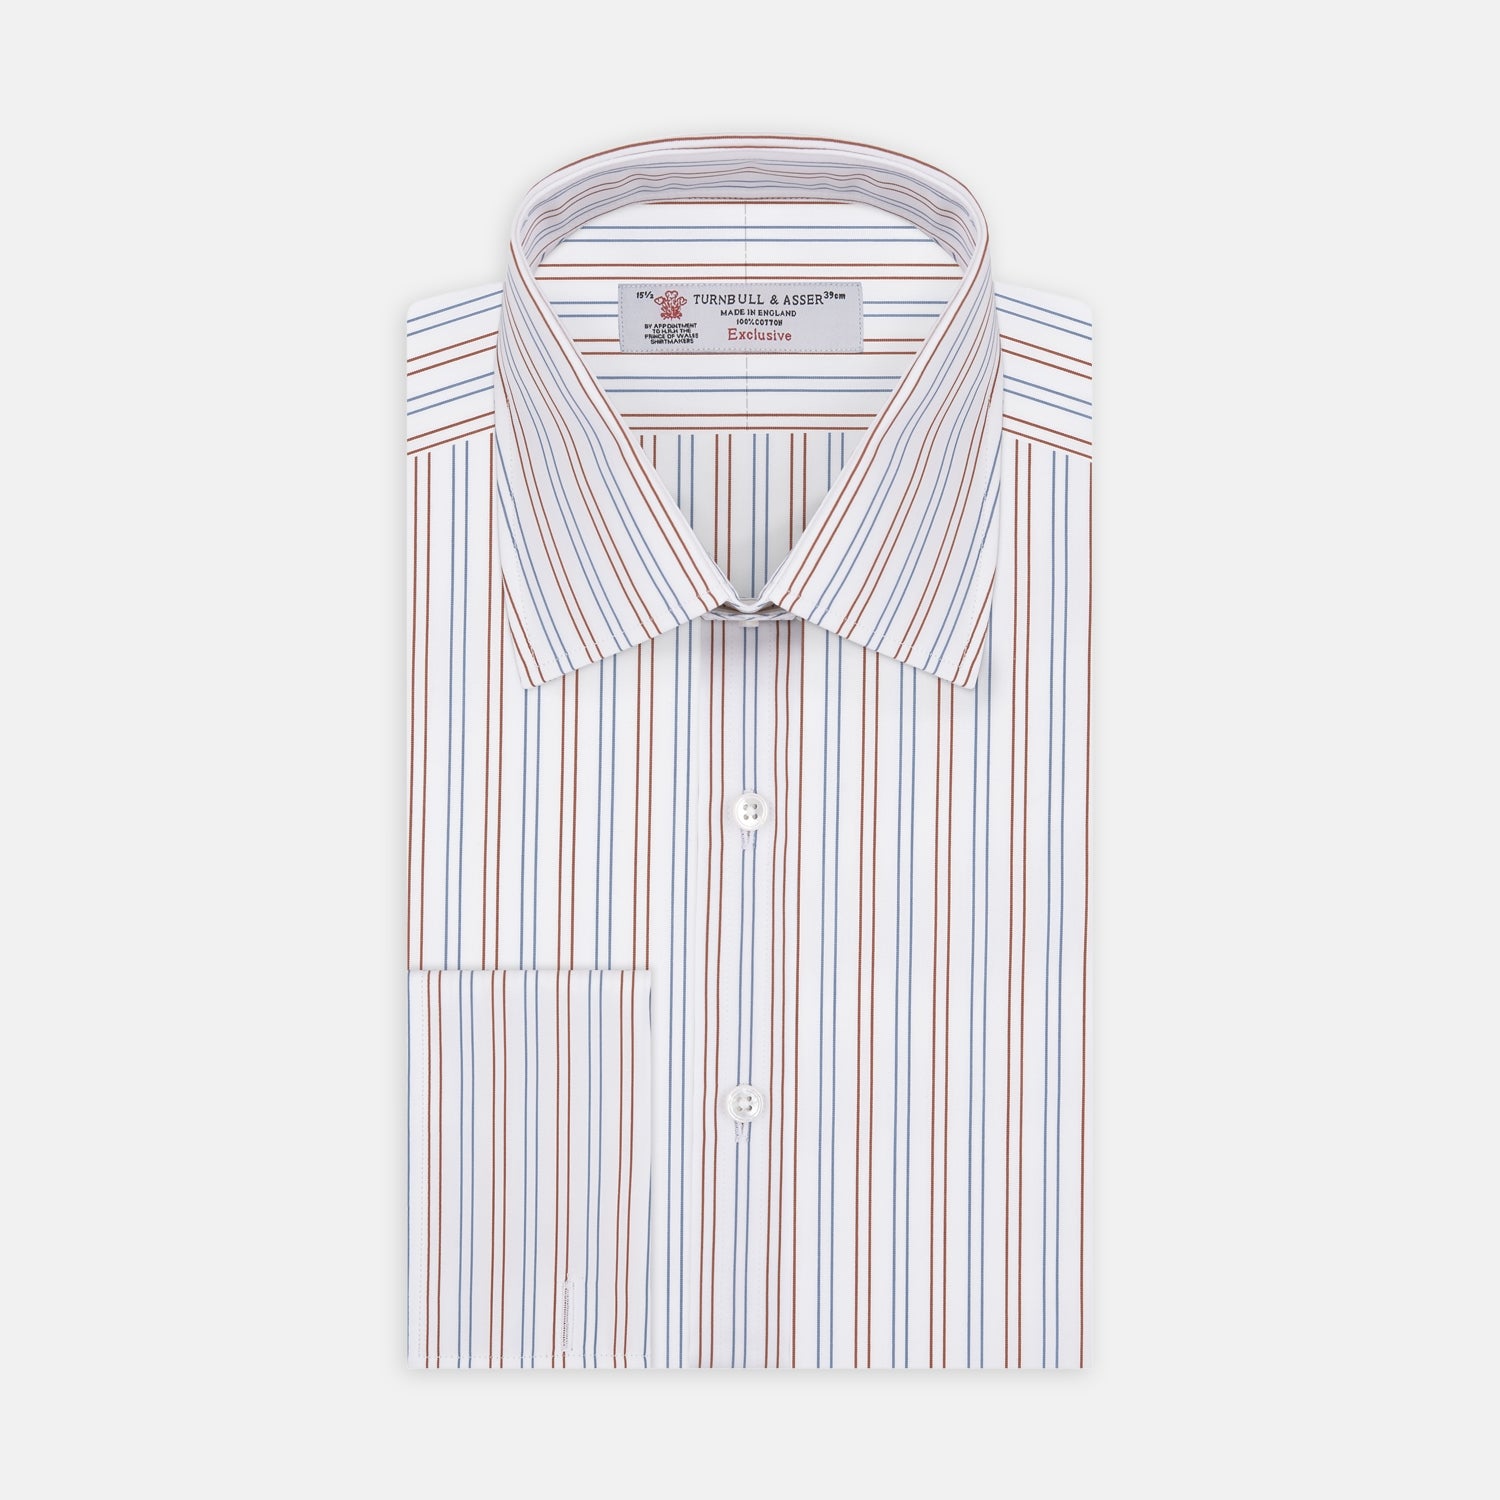 White, Brown and Blue Double Stripe Shirt with T&A Collar and Double Cuffs